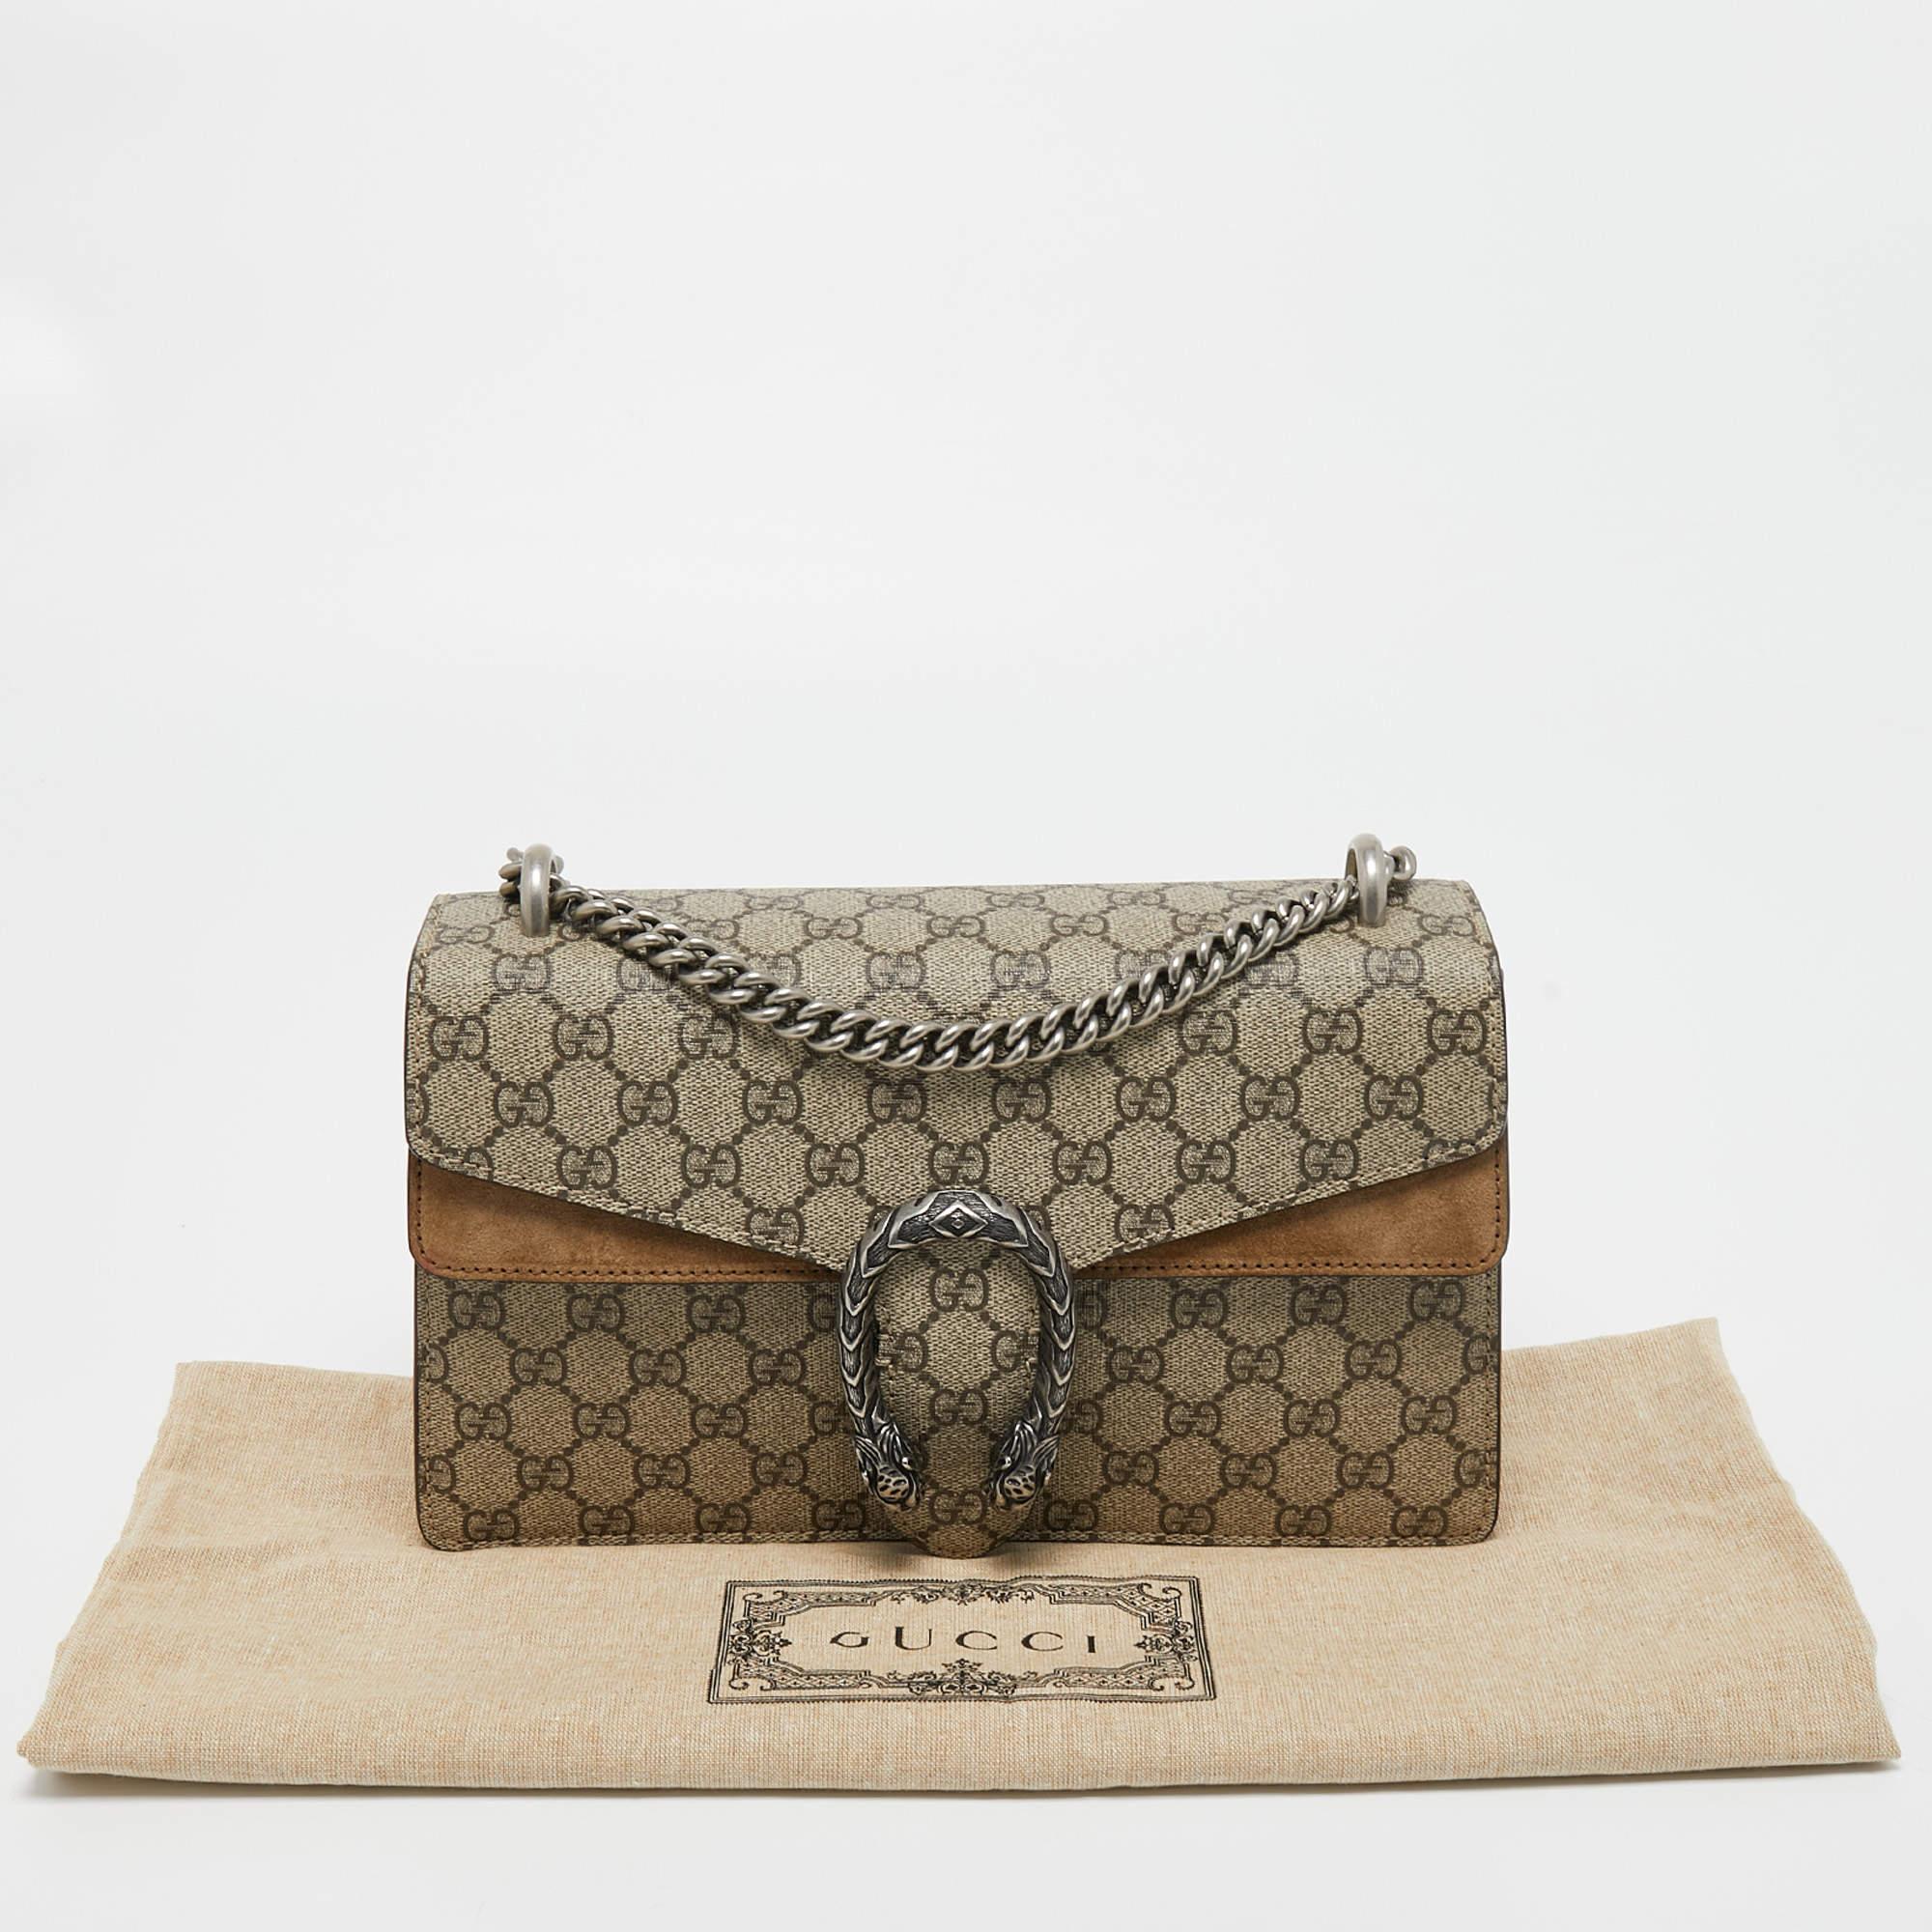 Gucci Beige GG Supreme Canvas and Suede Small Dionysus Shoulder Bag 8